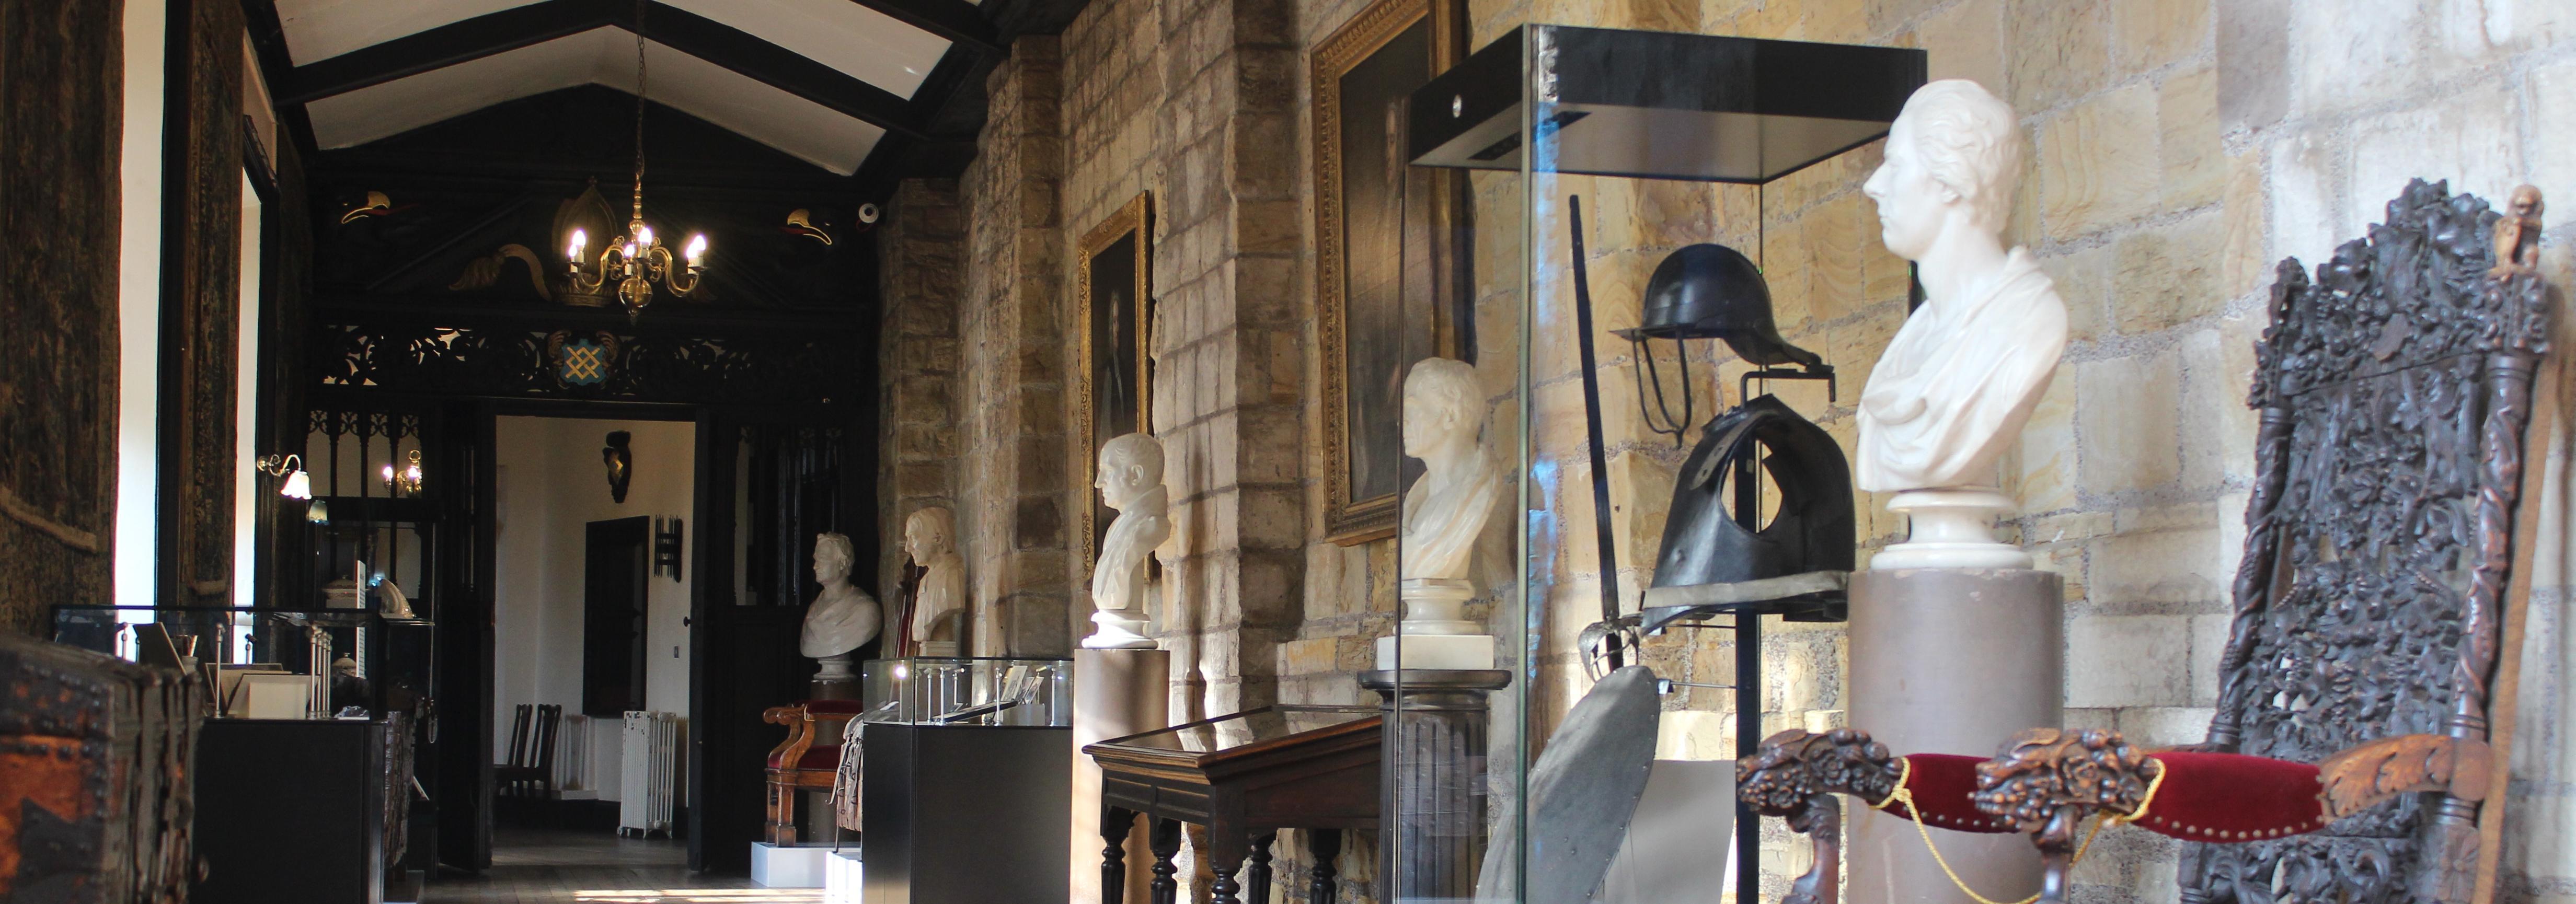 The Tunstall Gallery of Durham Castle